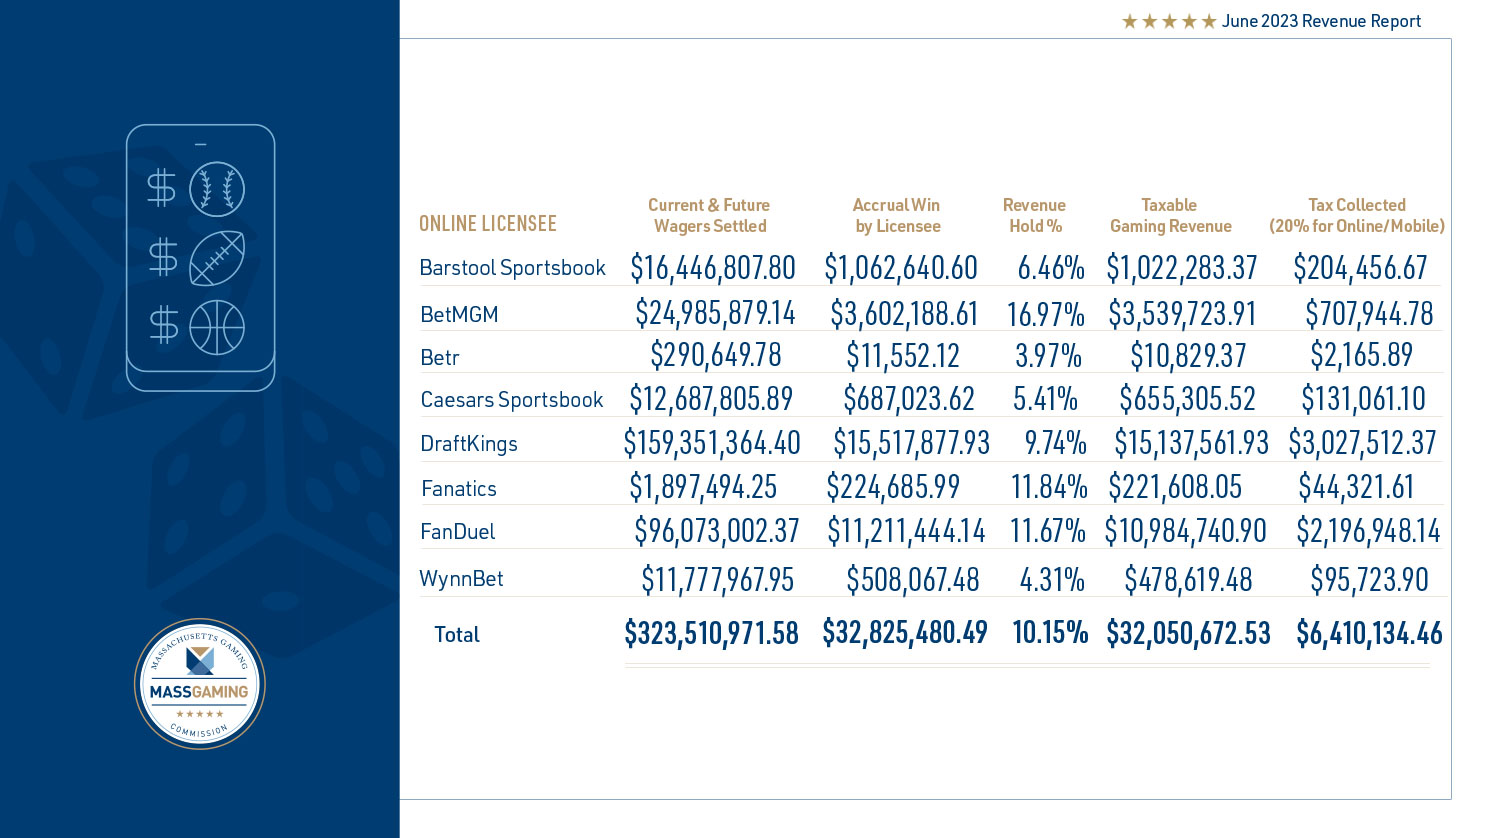 Sample page from Mass Gaming Revenue Report